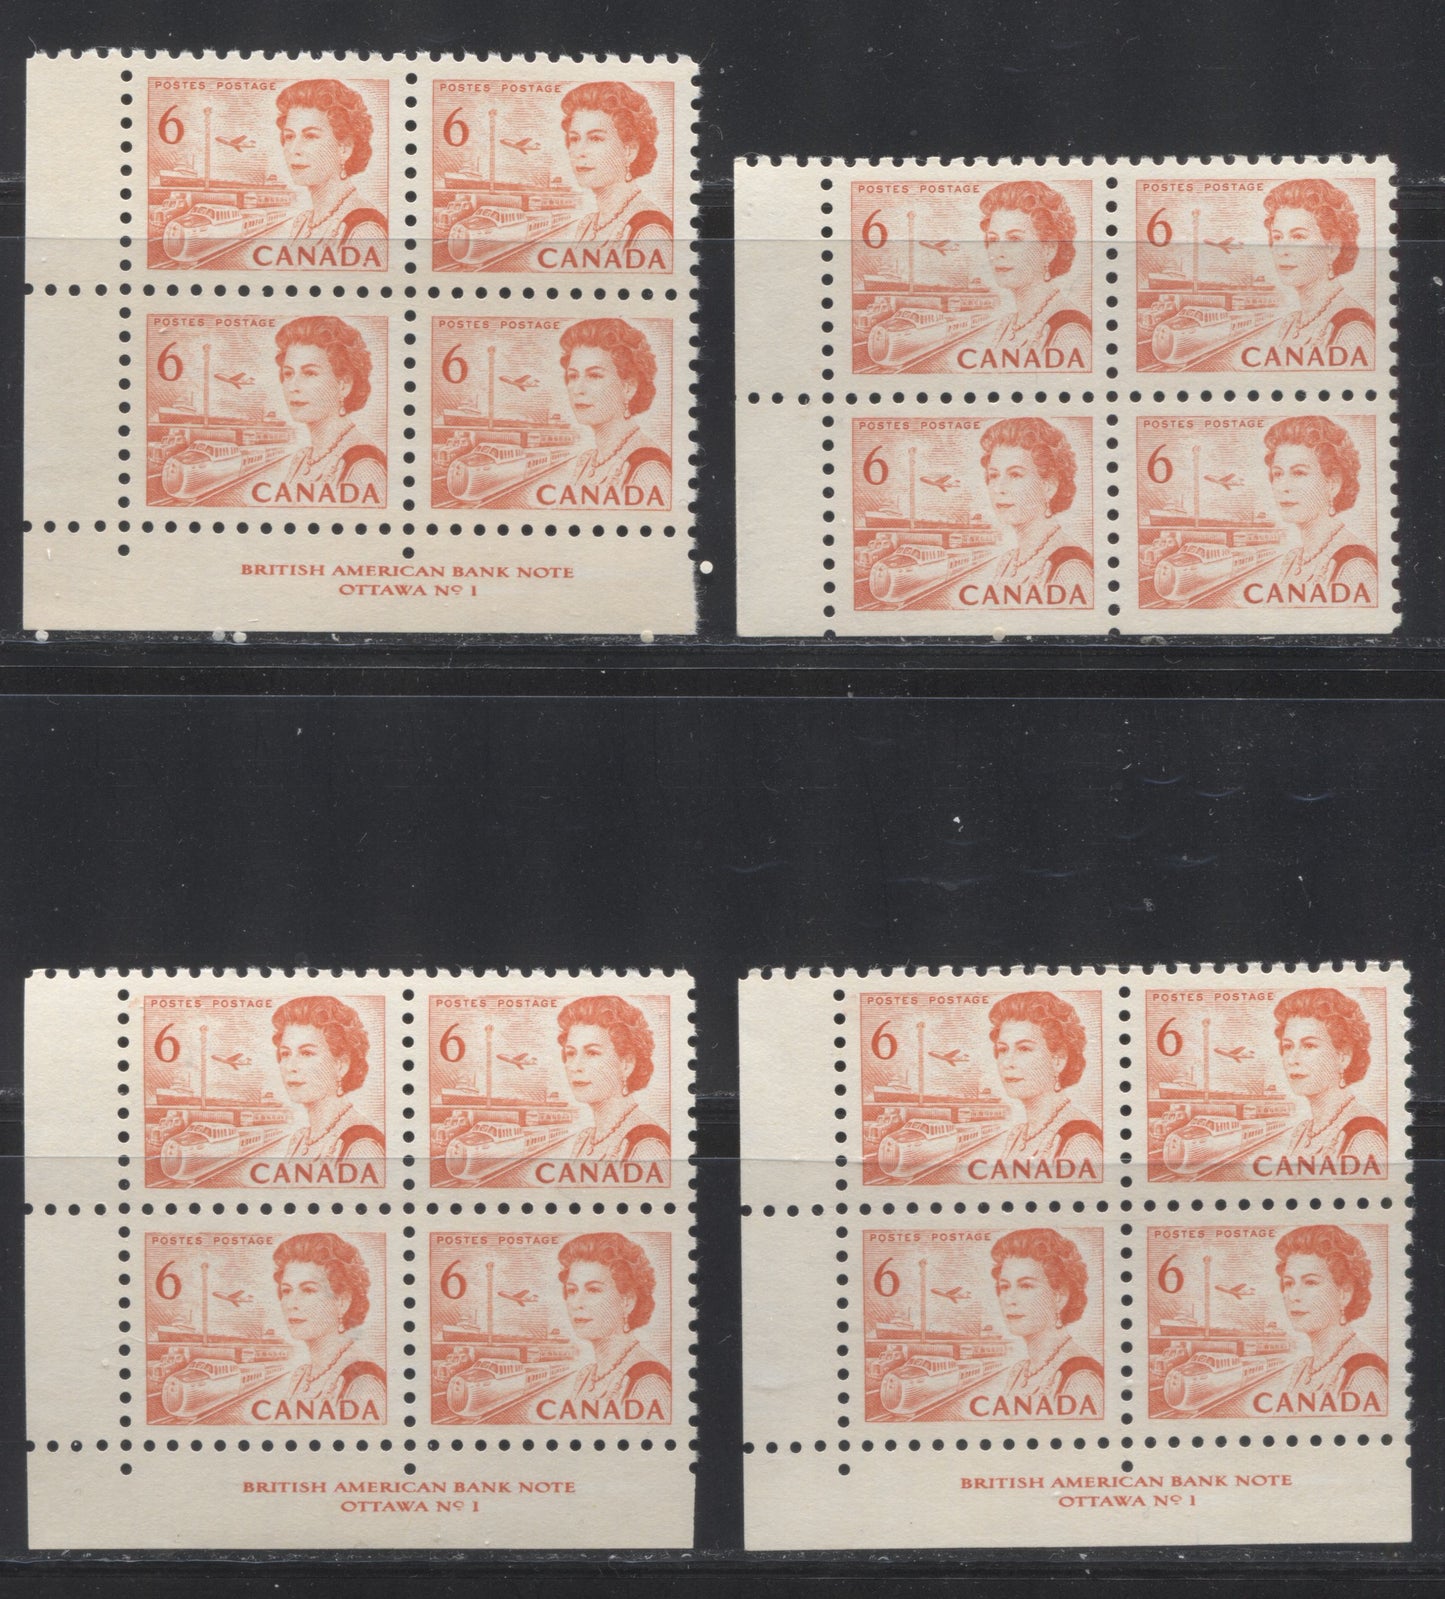 Lot 139 Canada #459i 6c Orange Transportation, 1967-1973 Centennial Definitive Issue, Four VFNH LL Blank & Plate 1 Blocks Of 4 On LF-fl Bluish White, Grayish White & Ivory Papers With Dex Gums